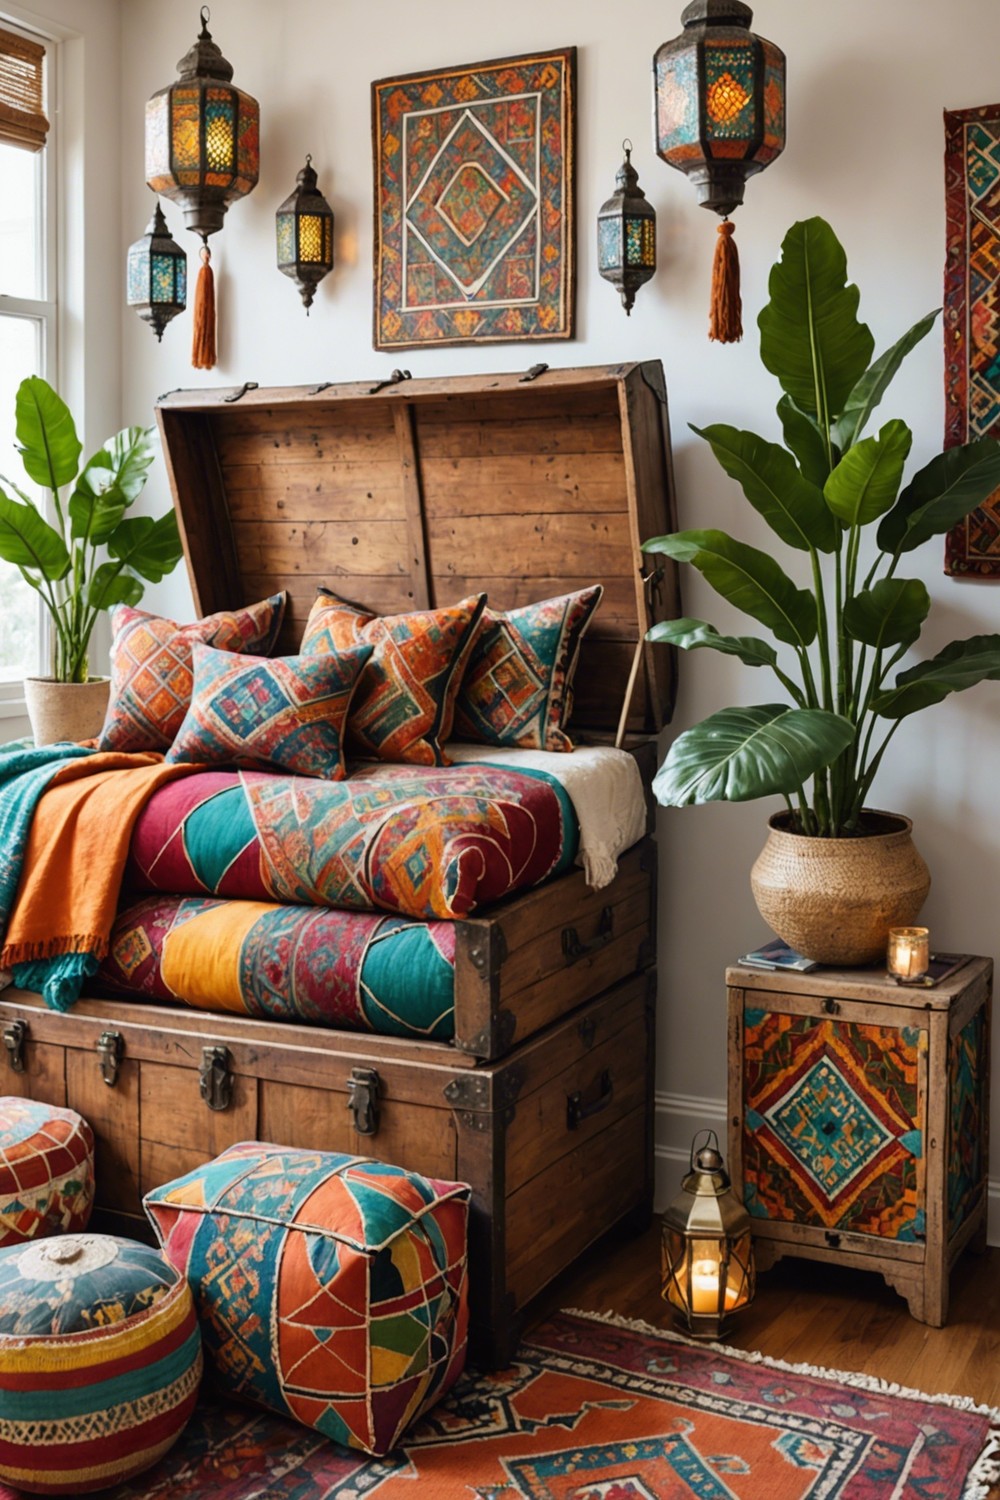 Decorative Storage Trunks with Moroccan-Inspired Tiles